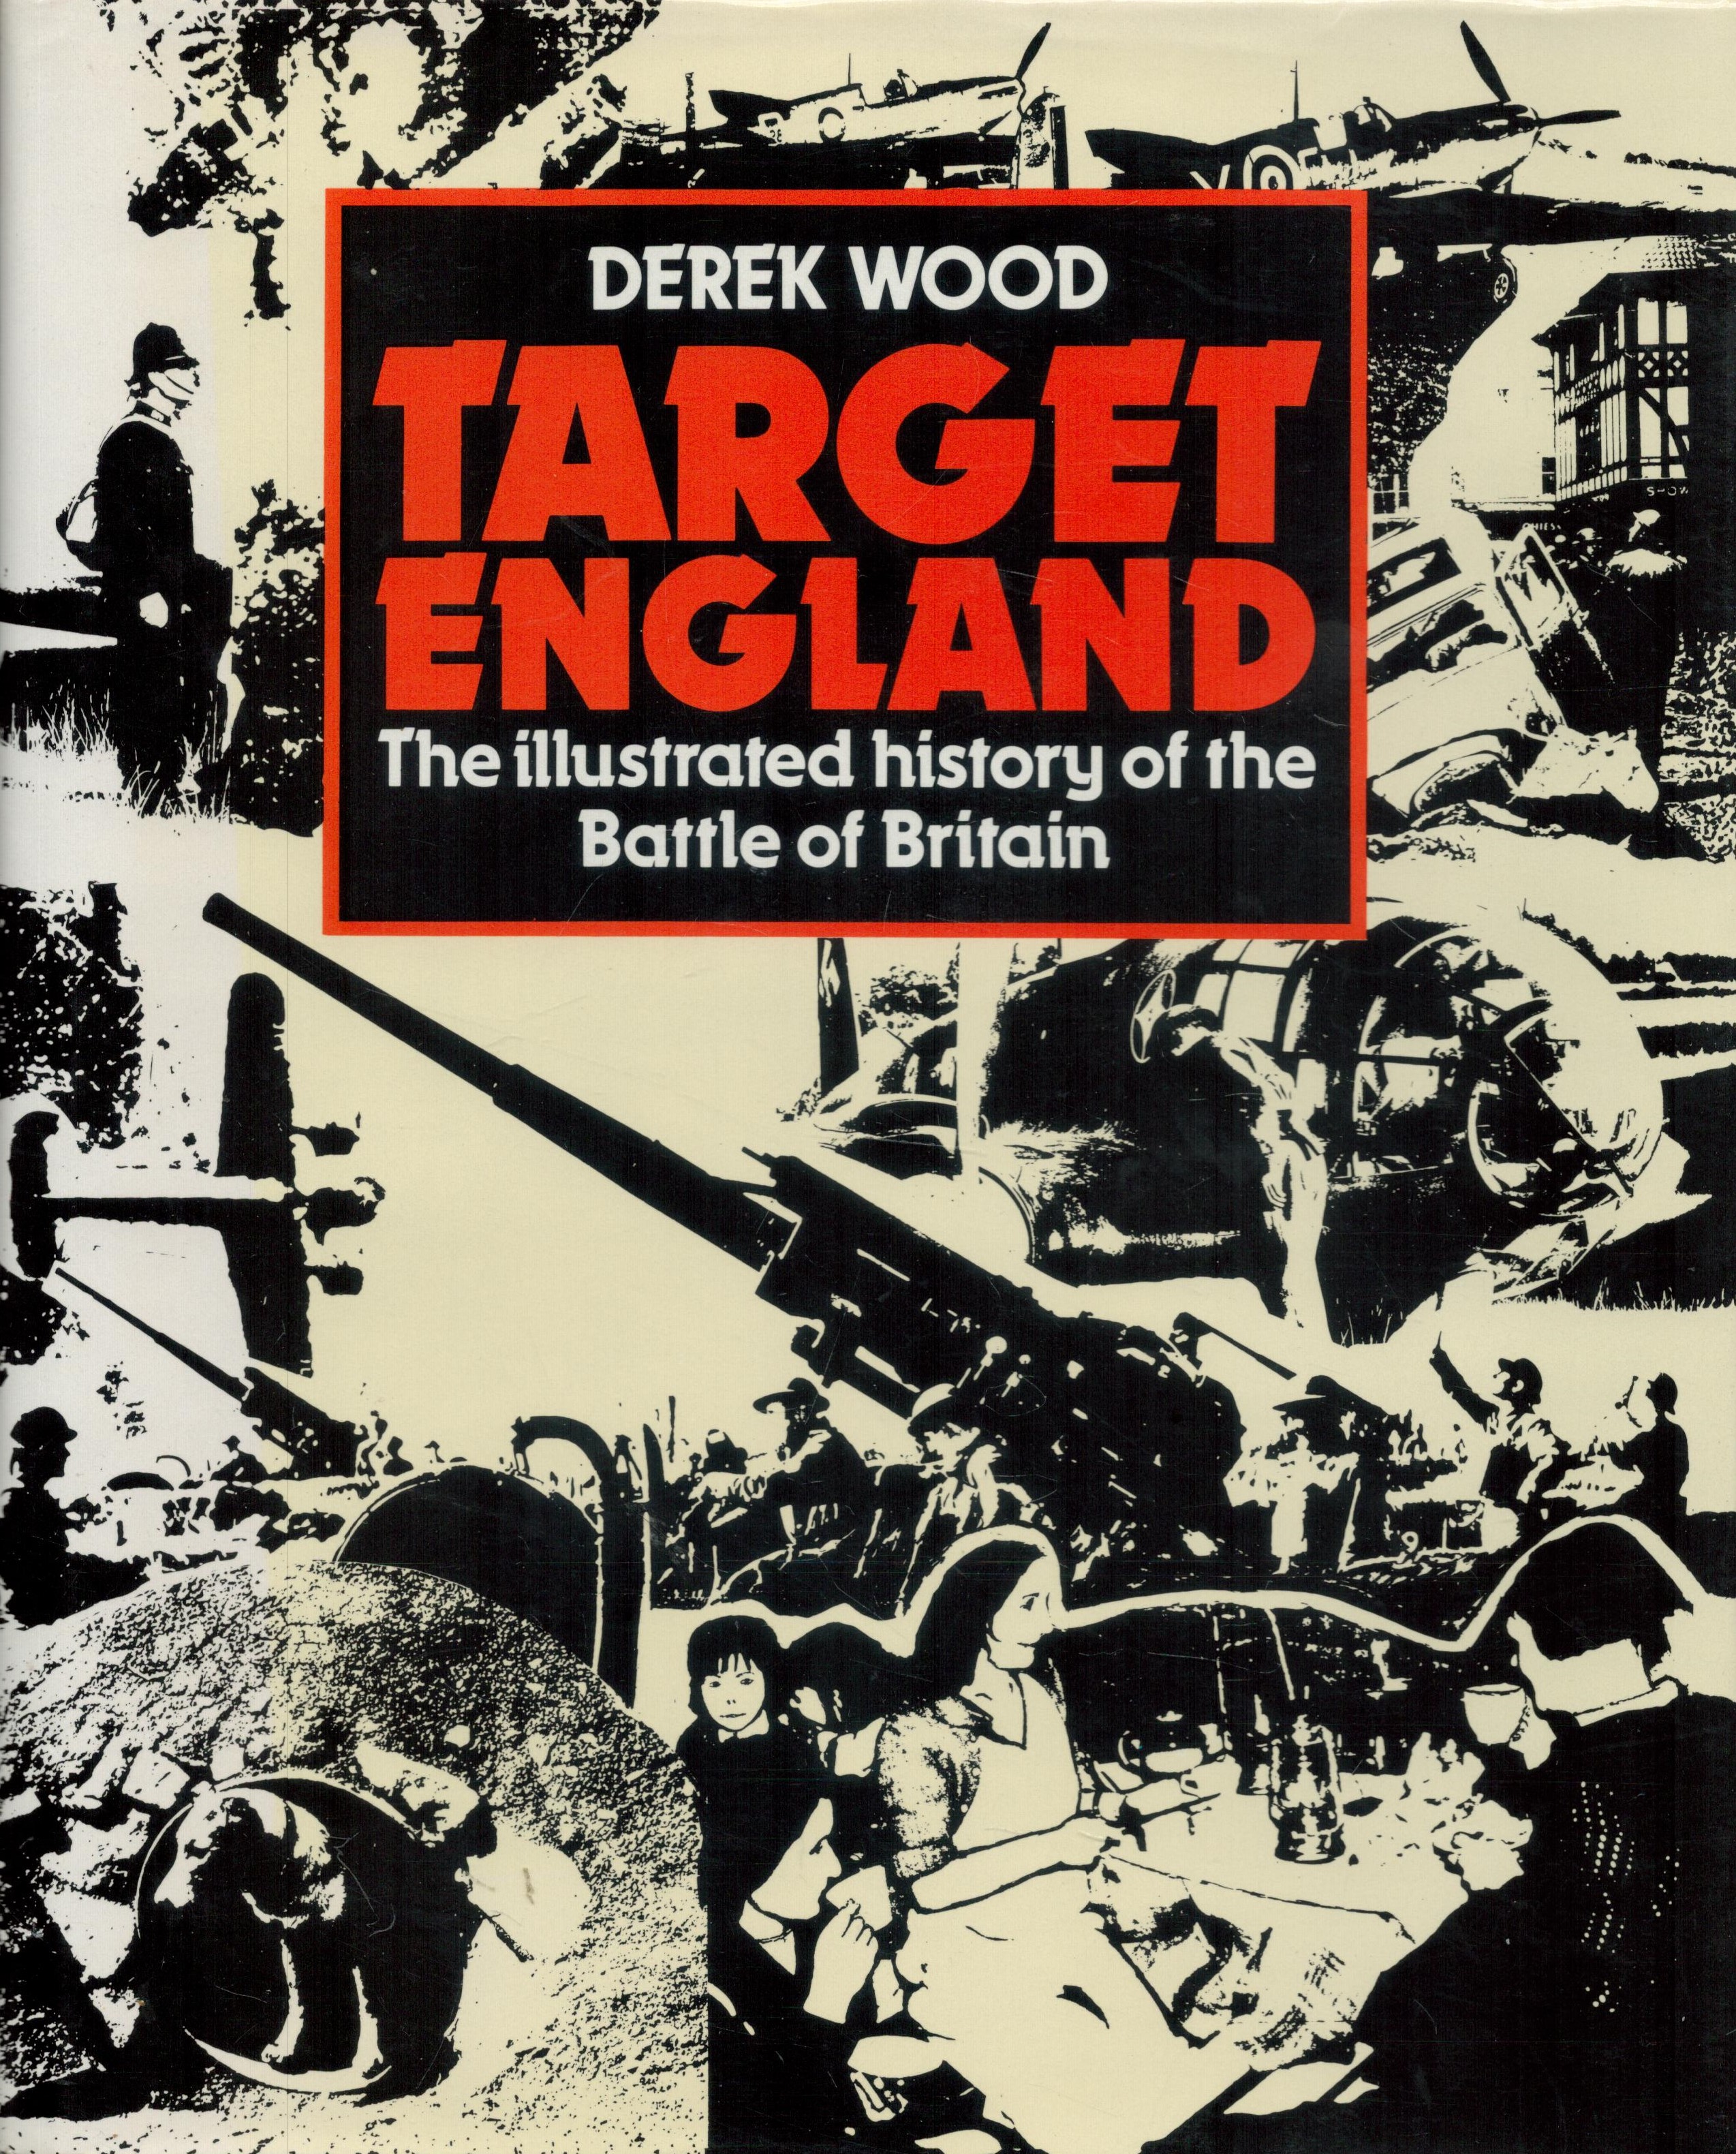 Target England Illustrated History of the Battle of Britain by Derek Wood Hardback Book 1980 First